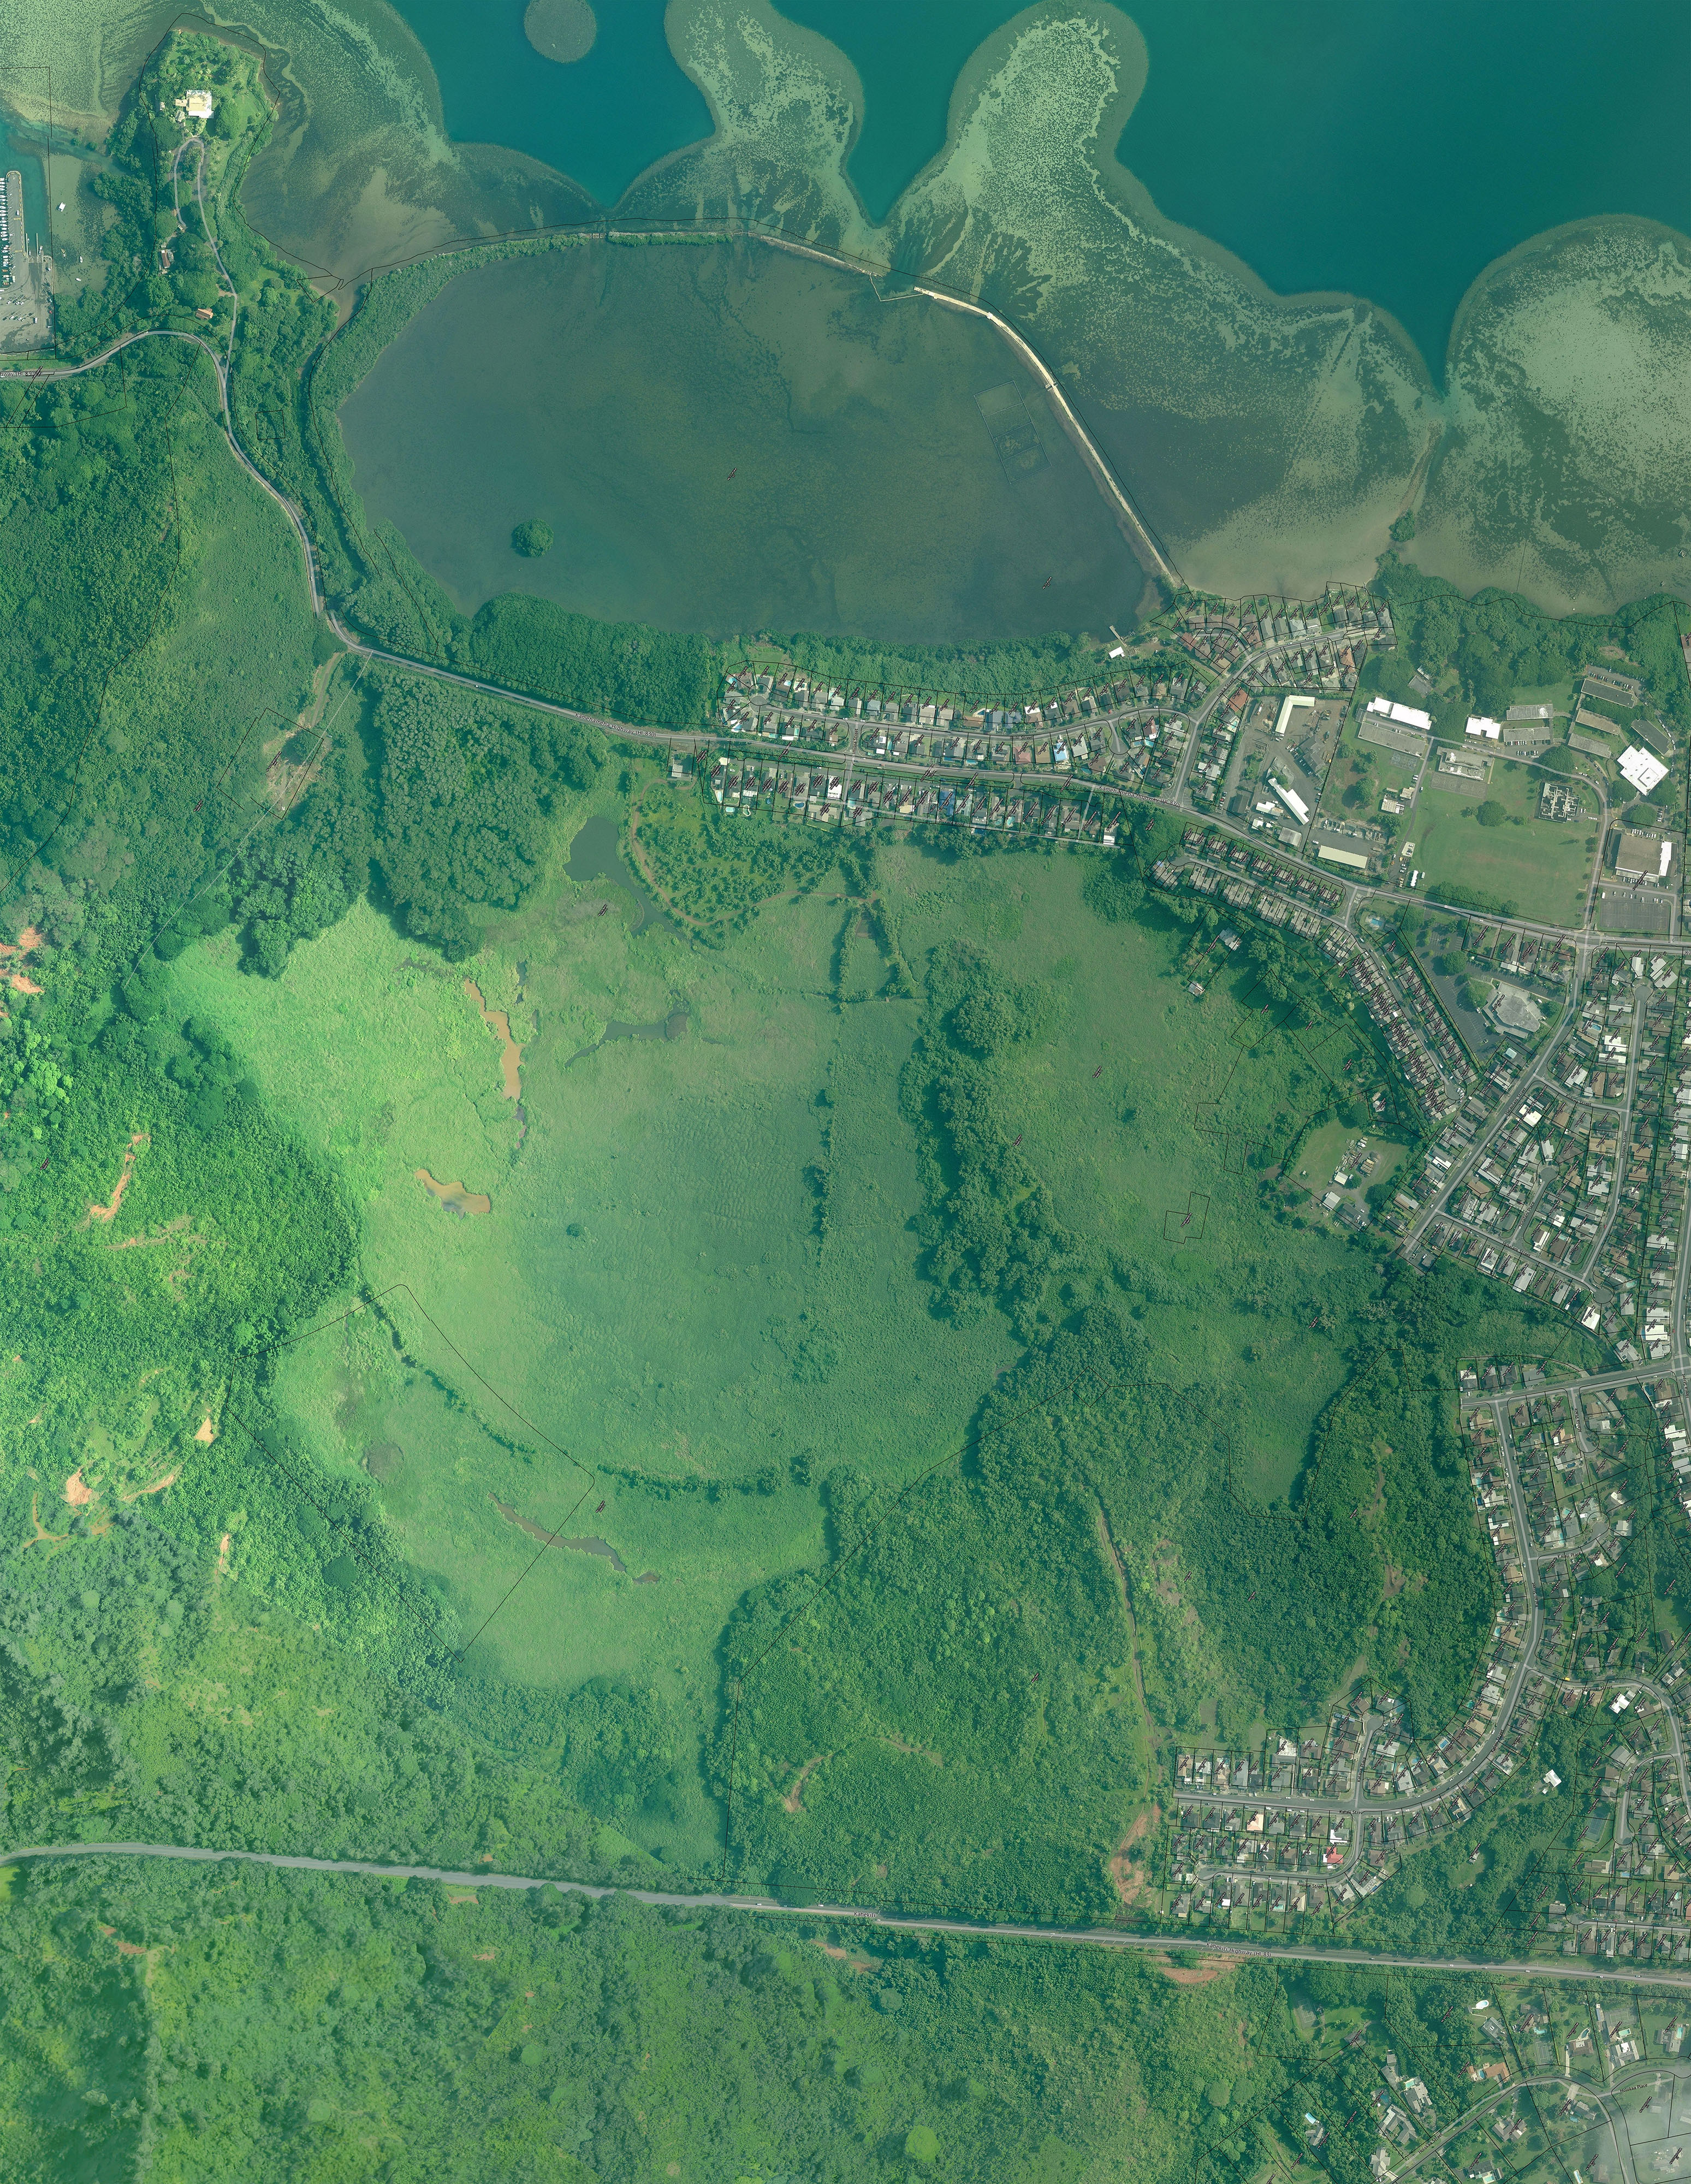 Circa 2000 color satellite image of urban development bordering uplands, wetlands and a fishpond and invasive mangroves covering acres of the wetlands and surrounding the fishpond.